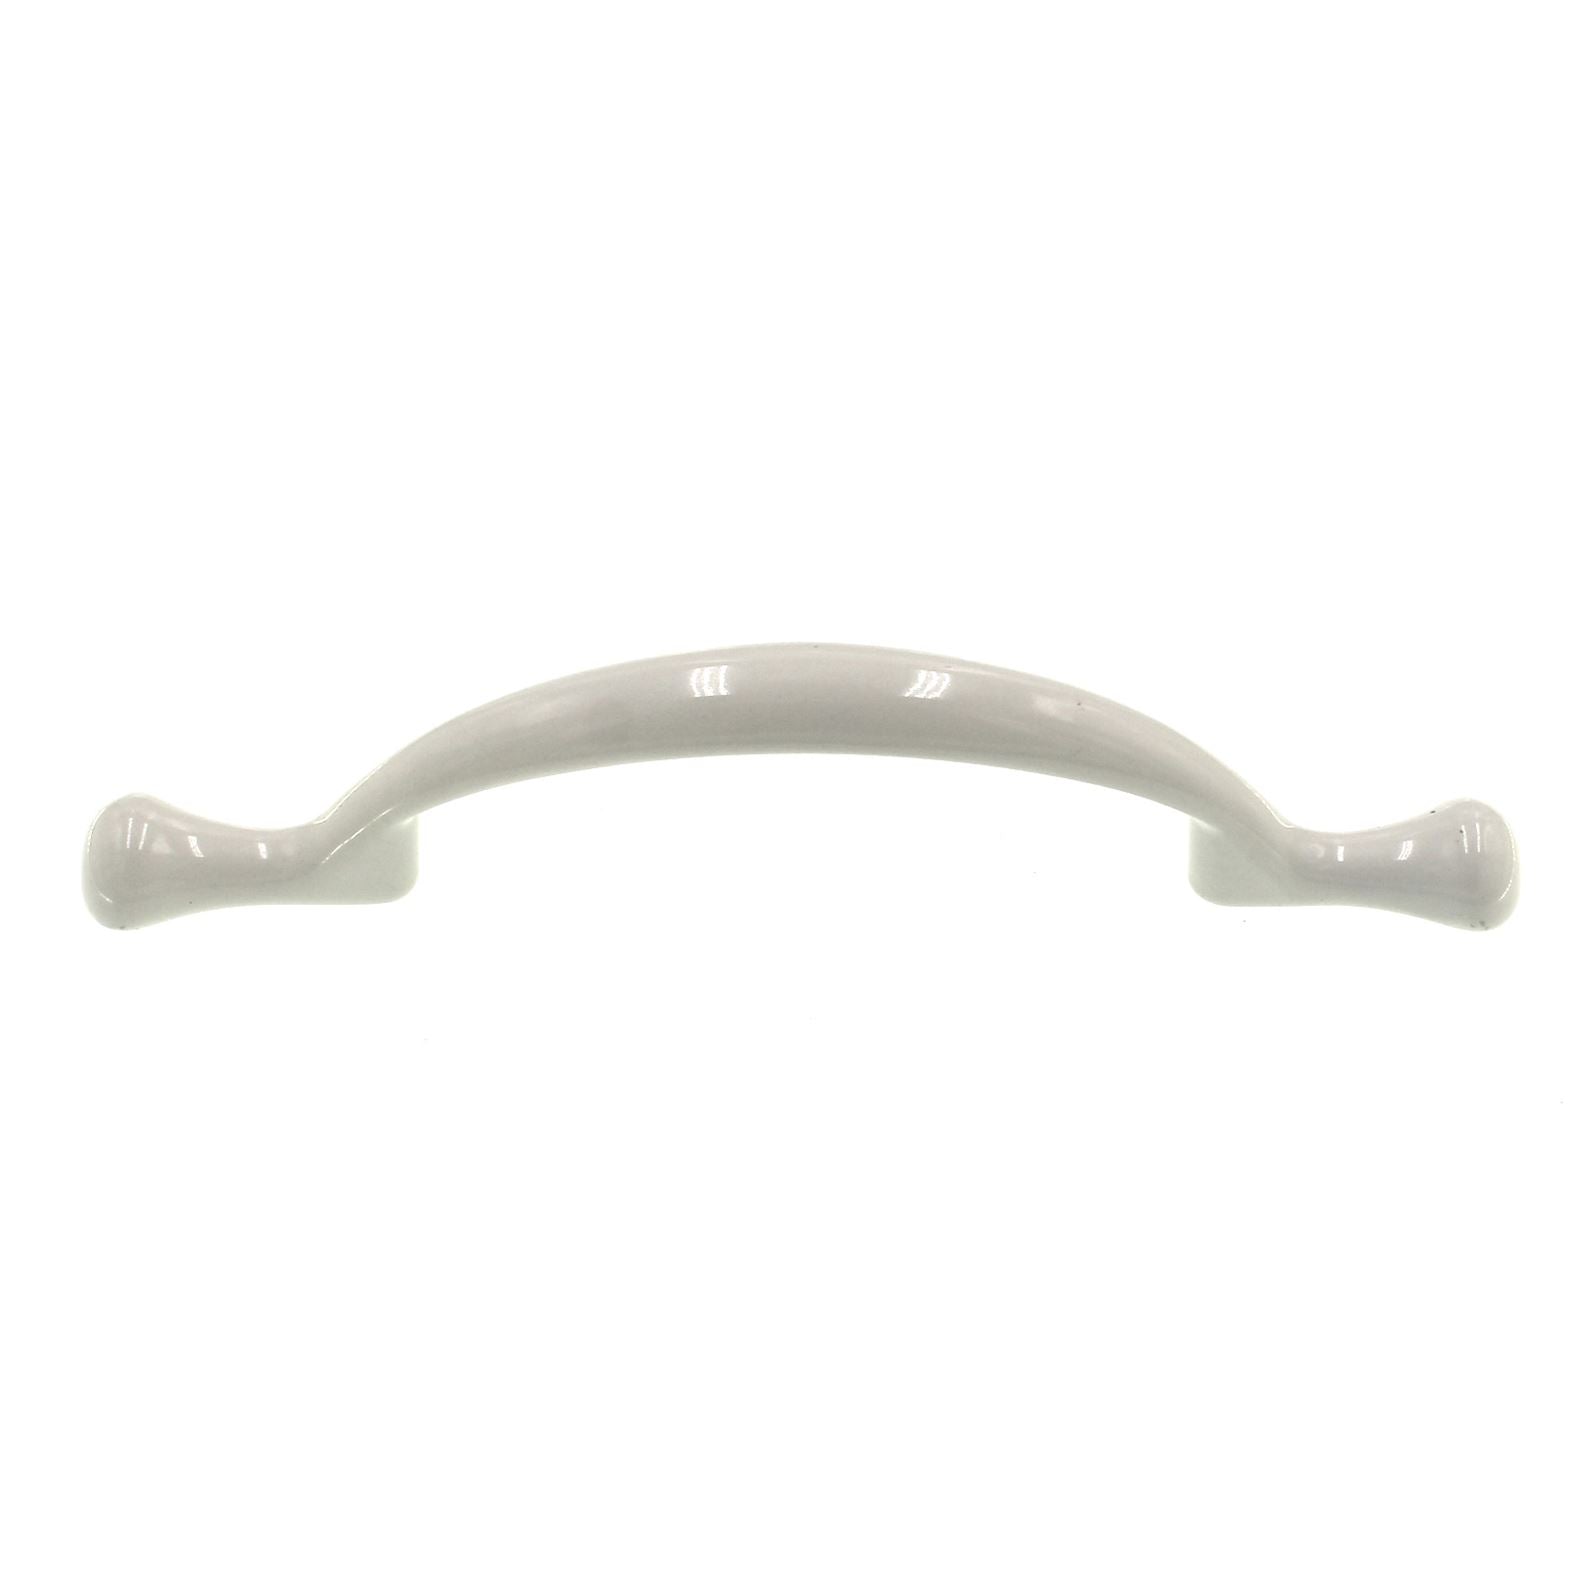 Hickory Hardware Conquest White 3" Ctr. Cabinet Arch Pull P14174-W